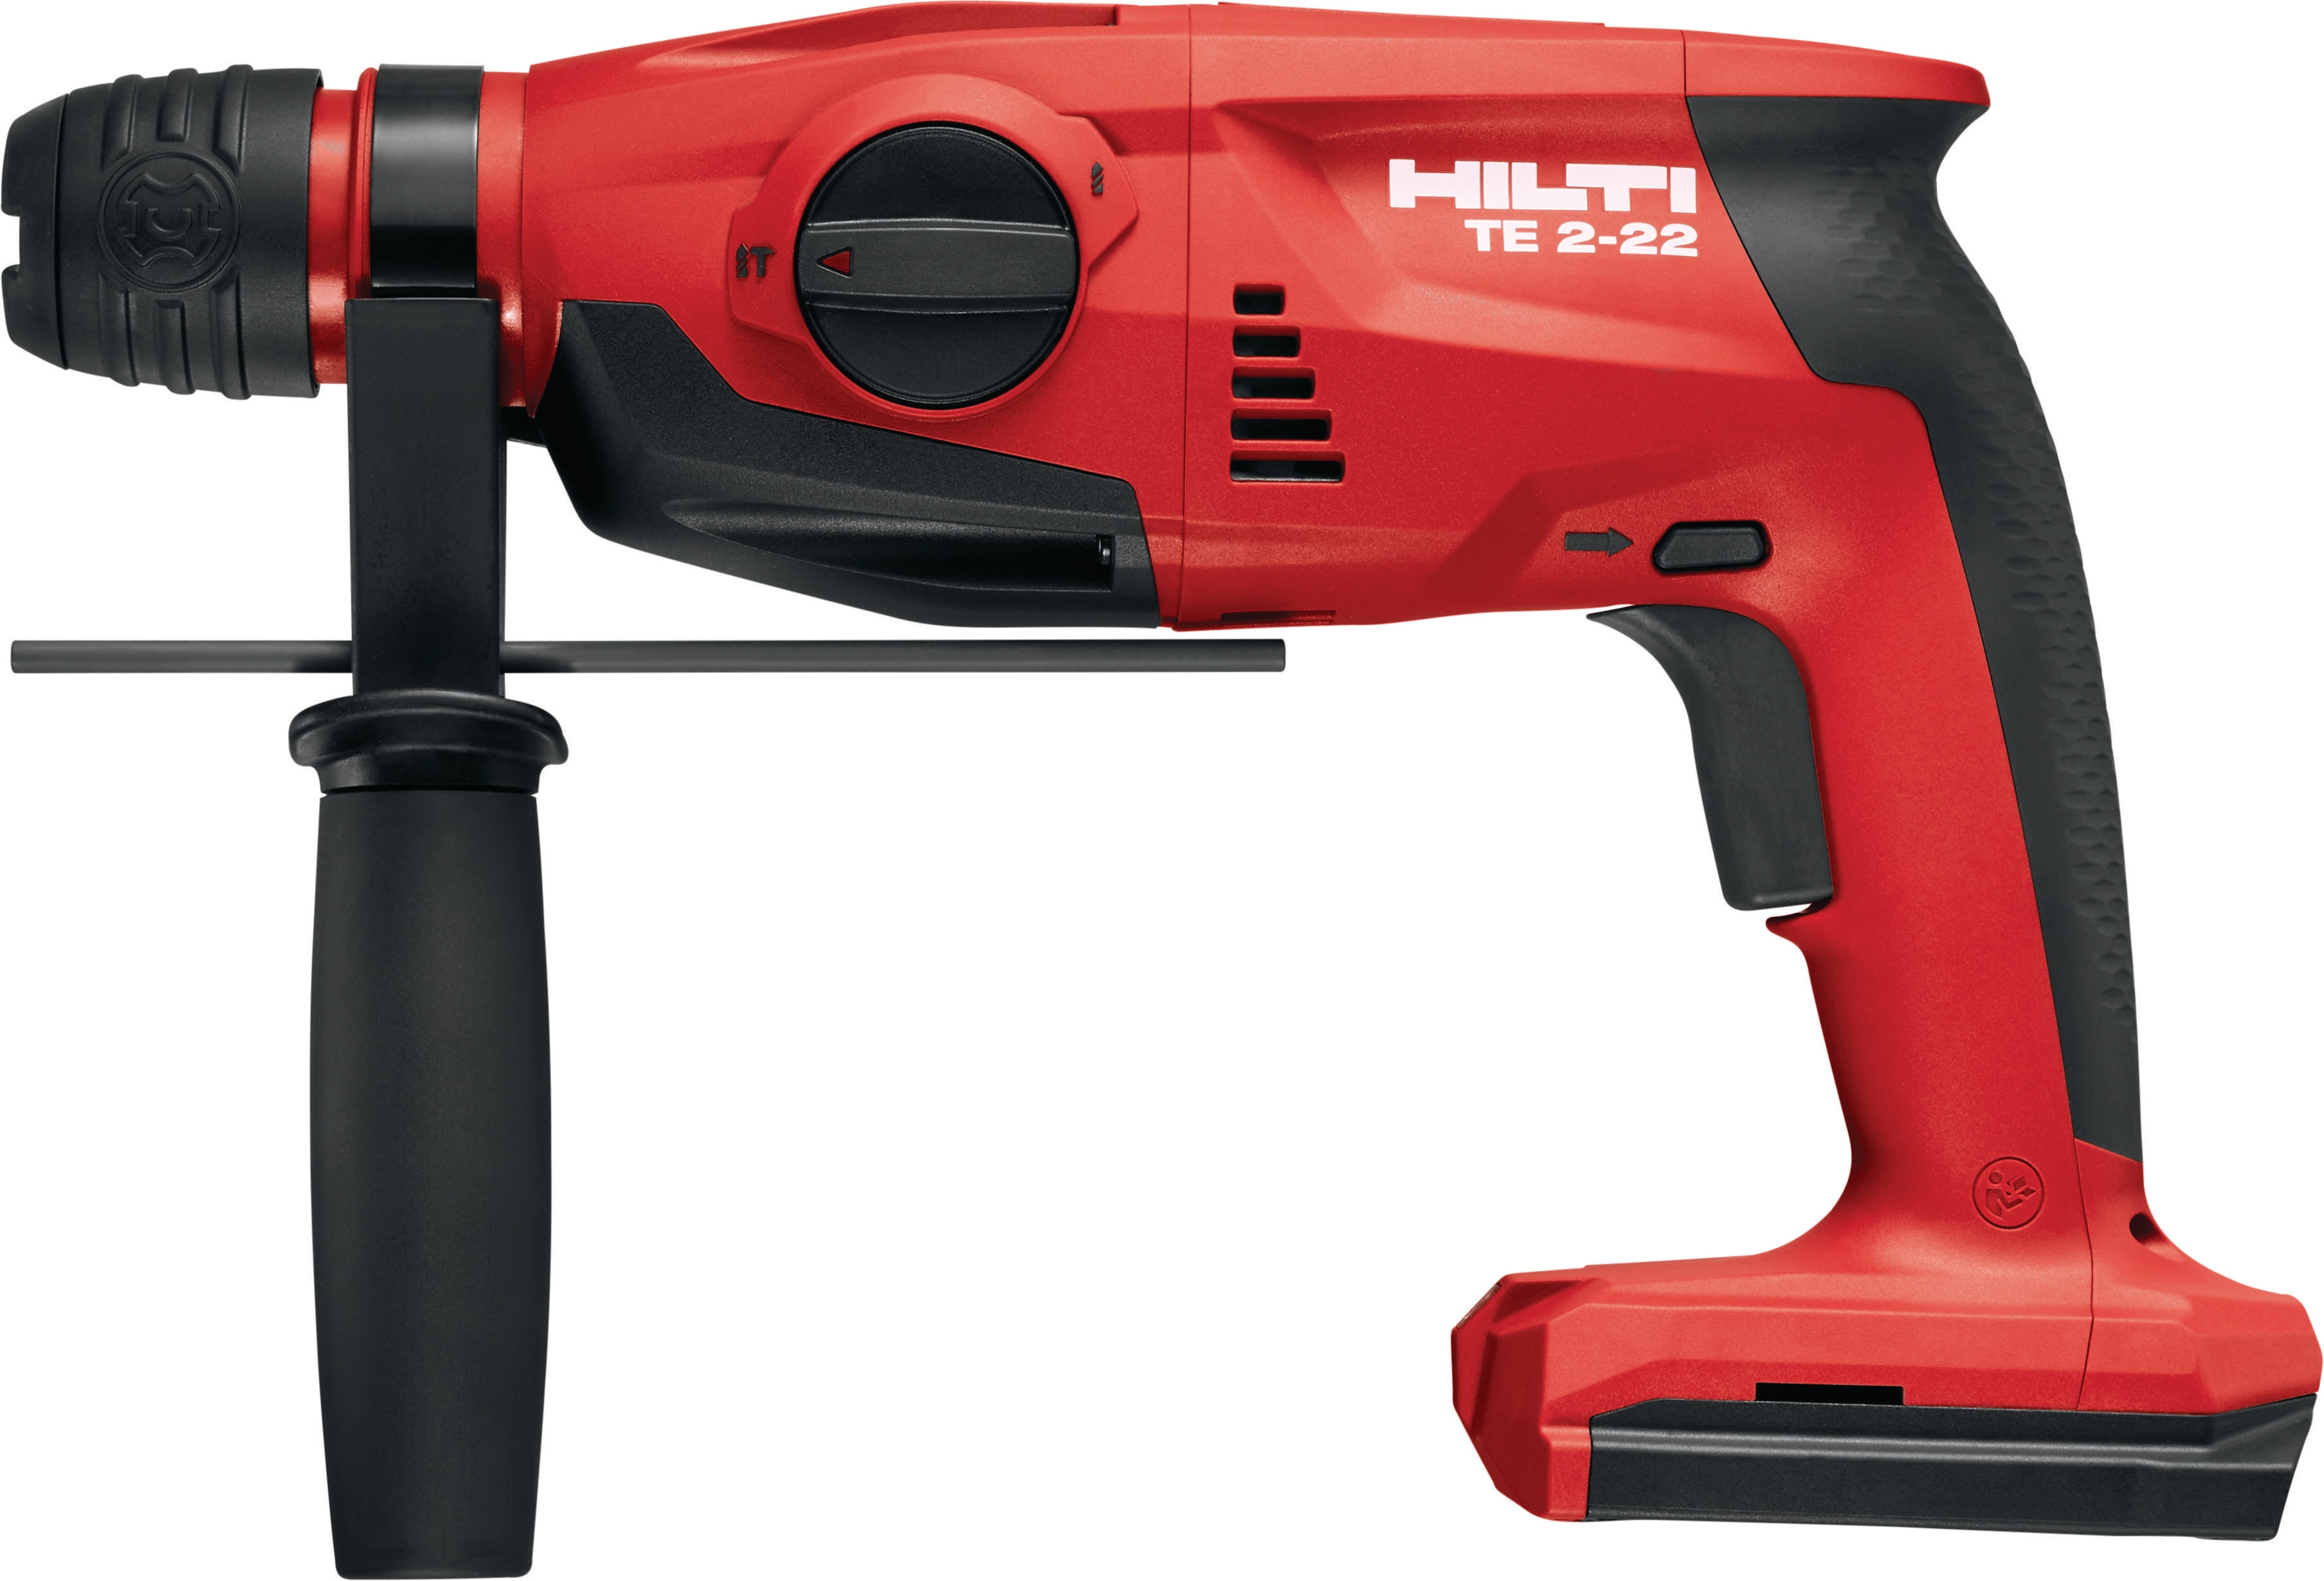 Hilti TE 2 Rotary Hammer Drill Corded Electric Profeesional Concrete Tool a_c 